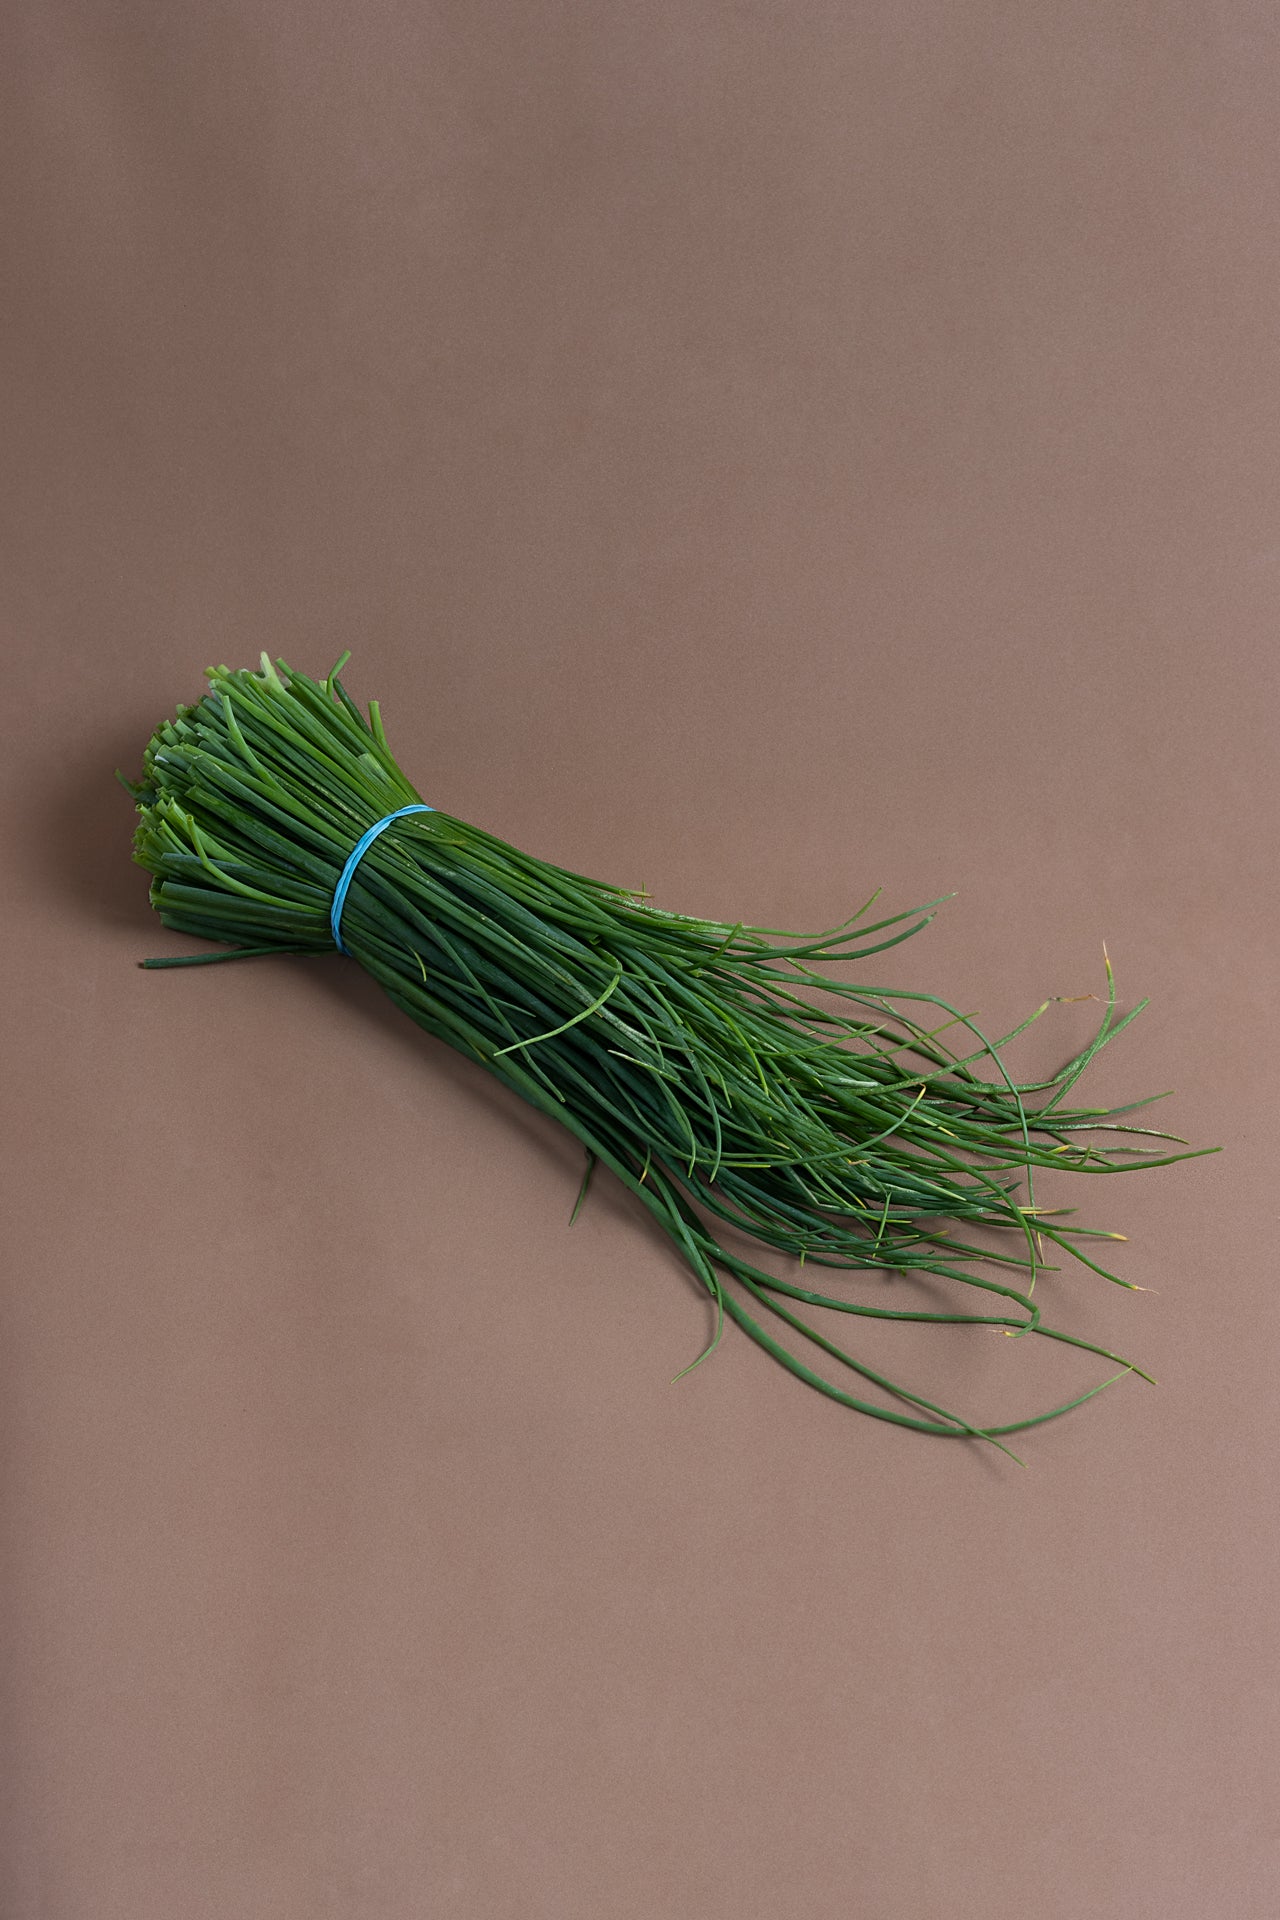 Chives (100g)